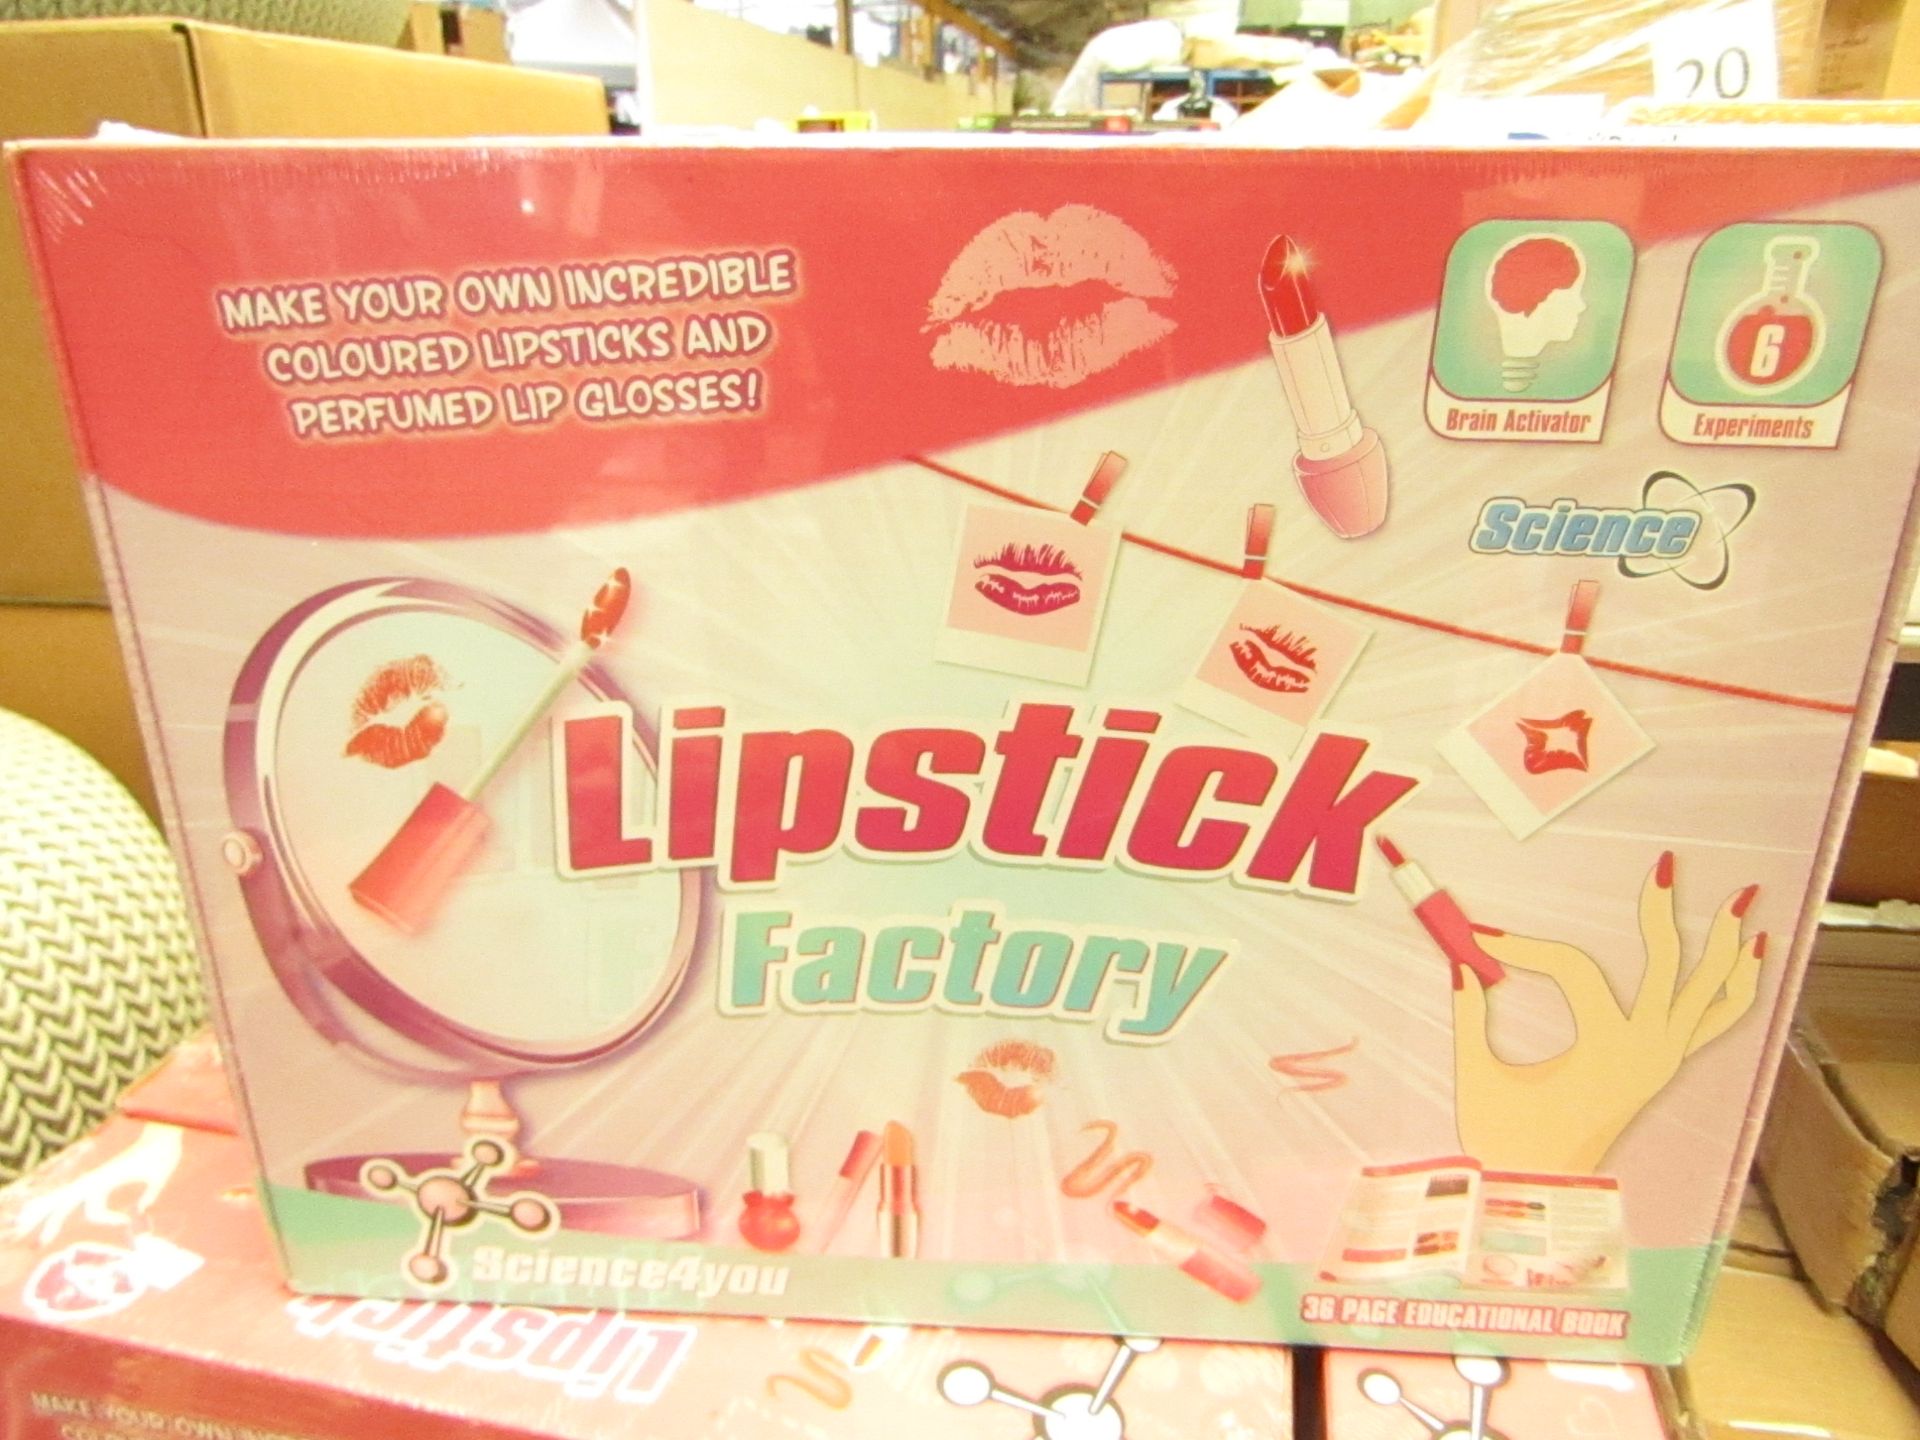 Science 4 You Lipstick Factory. Make your own coloured lipsticks & Perfumed Lip Gloss. New &